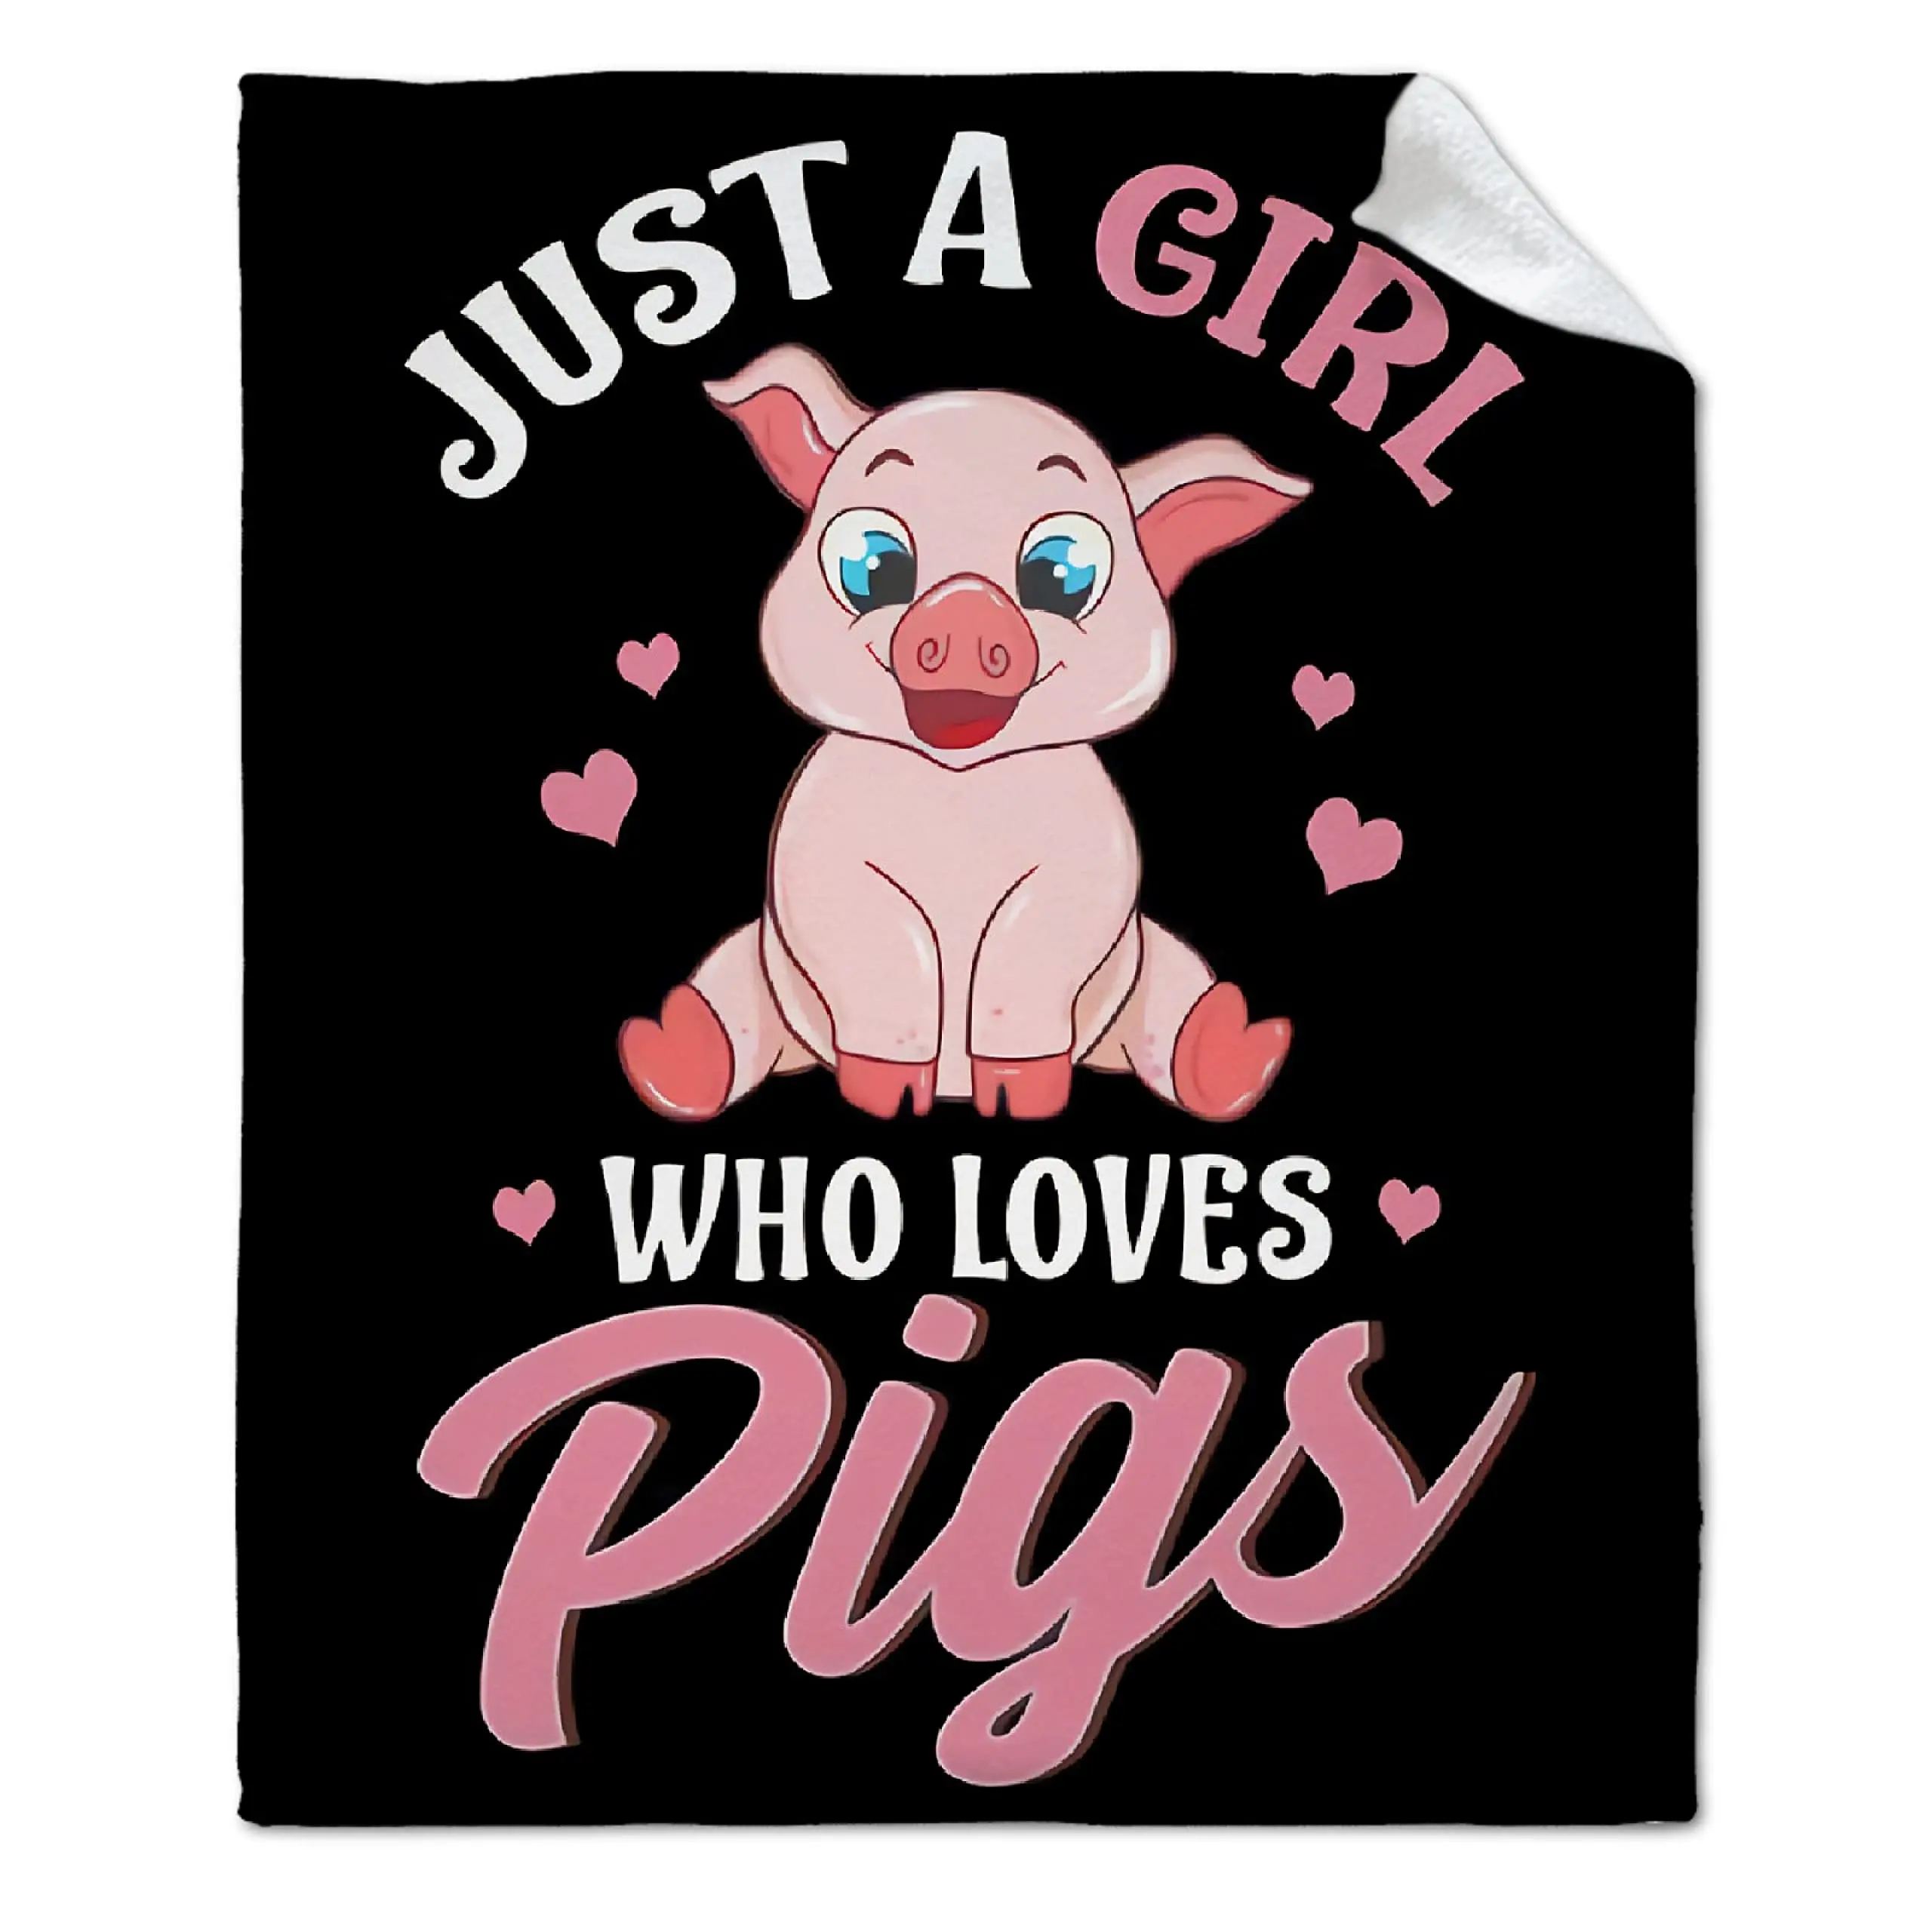 

I Like Pig Butts and I Cannot Lie Blanket Kawaii Piggy Blanket Perfect for Pig Lover Lightweight Soft for Bed Sofa Throw Flannel